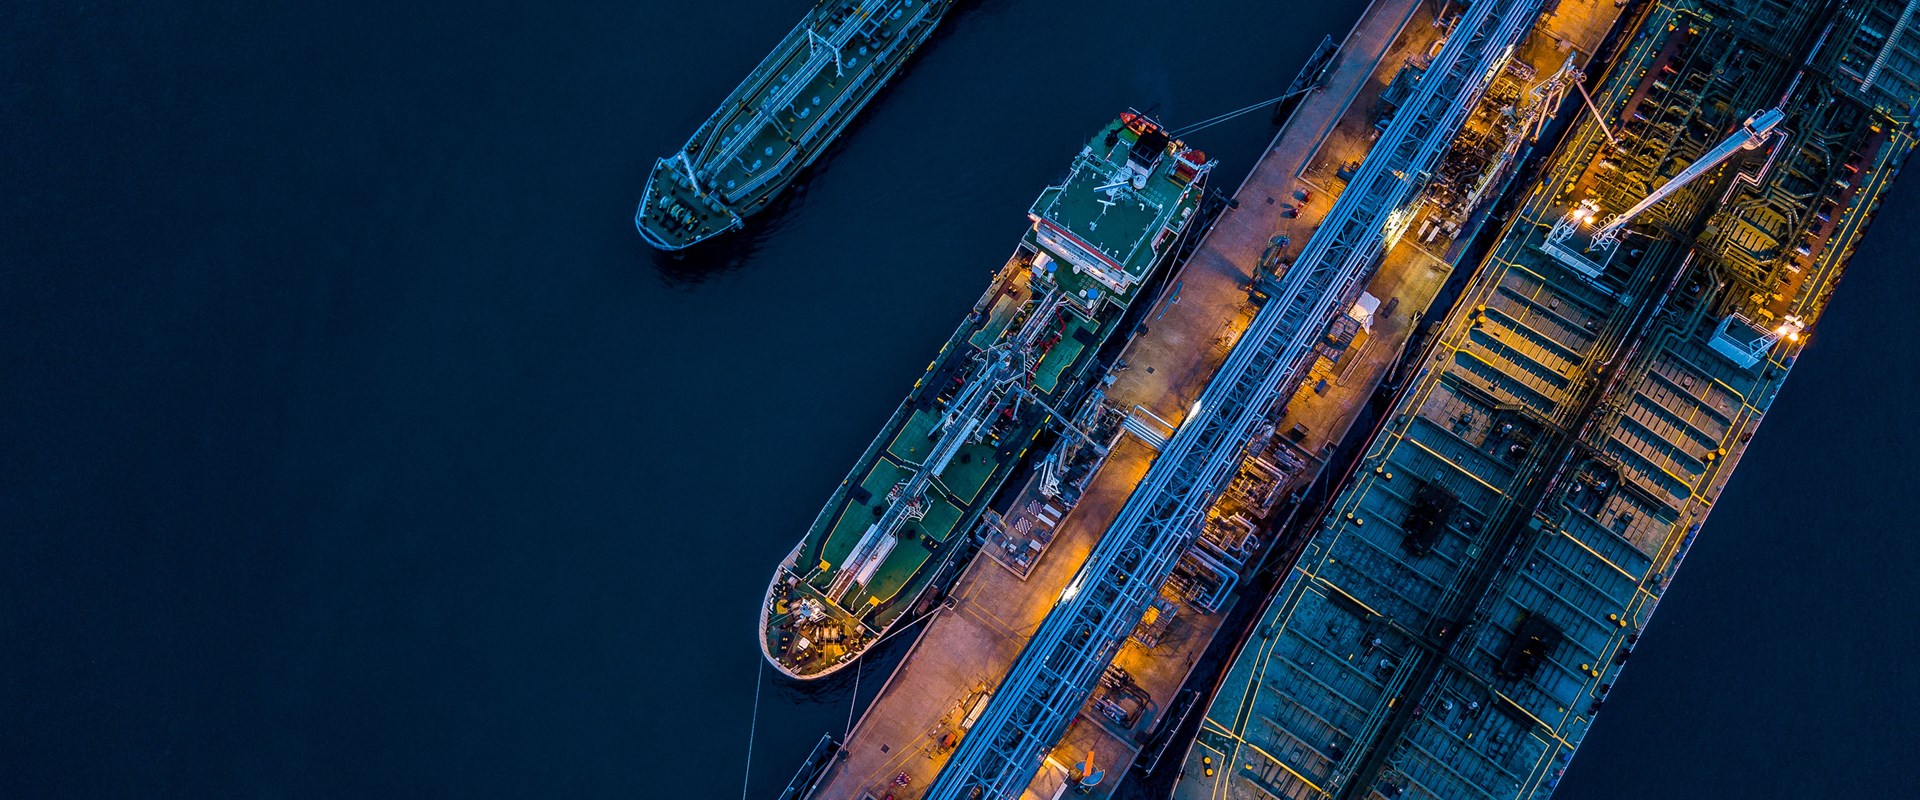 An aerial image of ships moored in a port at night